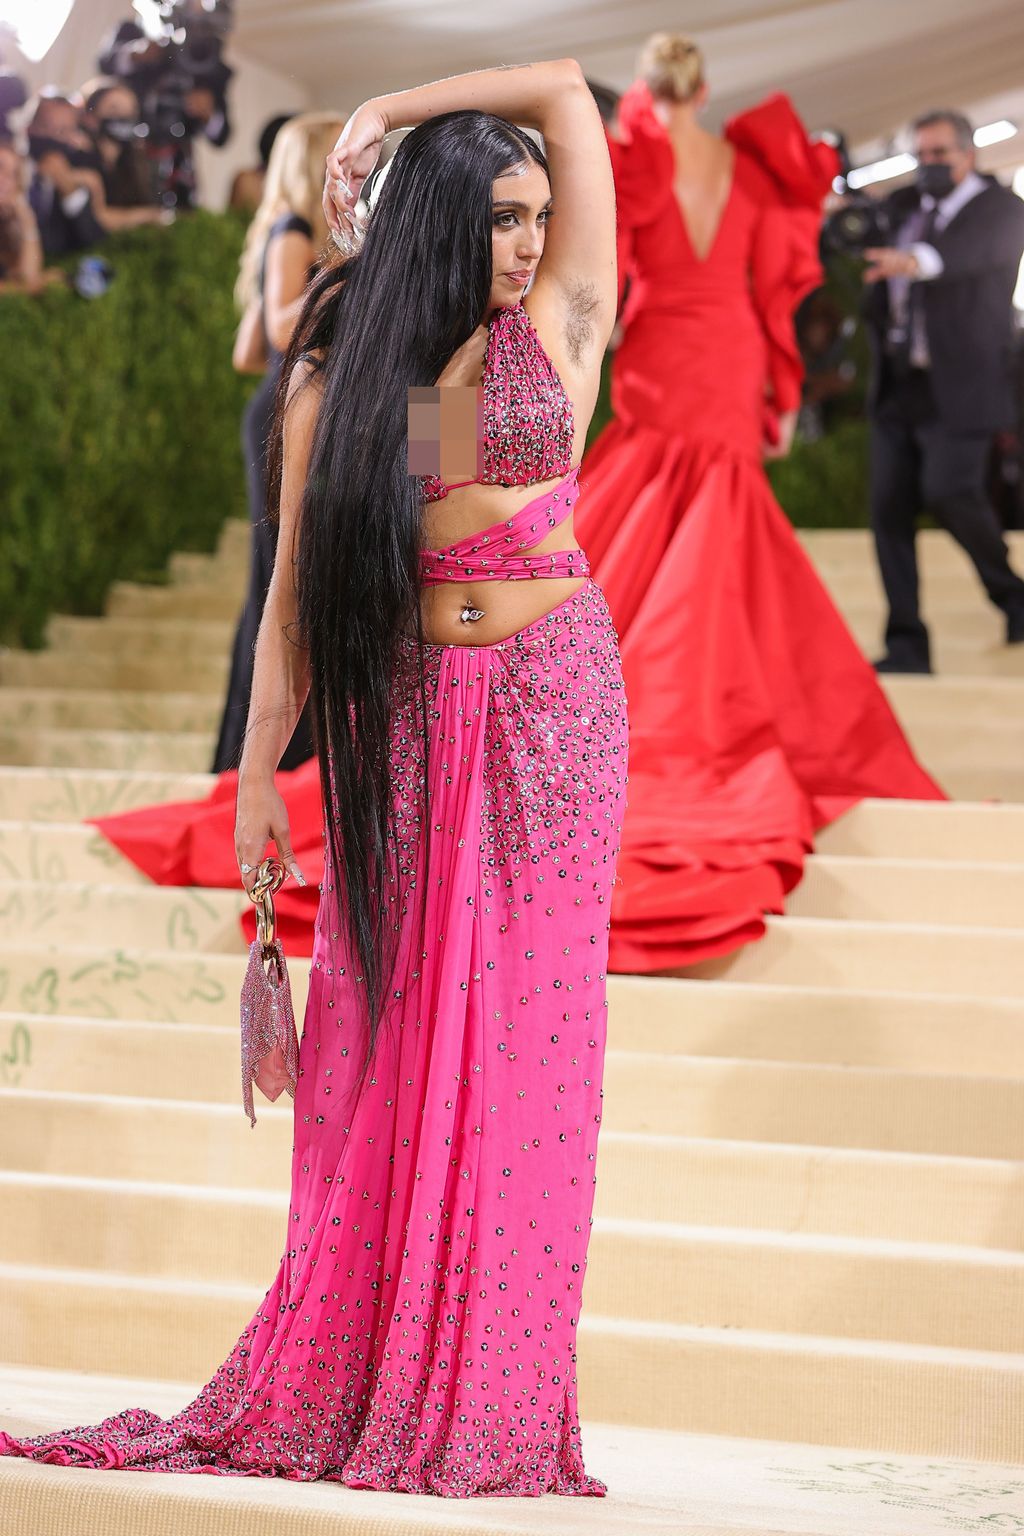 NEW YORK, NEW YORK - SEPTEMBER 13: Lourdes Leon attends The 2021 Met Gala Celebrating In America: A Lexicon Of Fashion at Metropolitan Museum of Art on September 13, 2021 in New York City. (Photo by Dimitrios Kambouris/Getty Images for The Met Museum/Vogue )